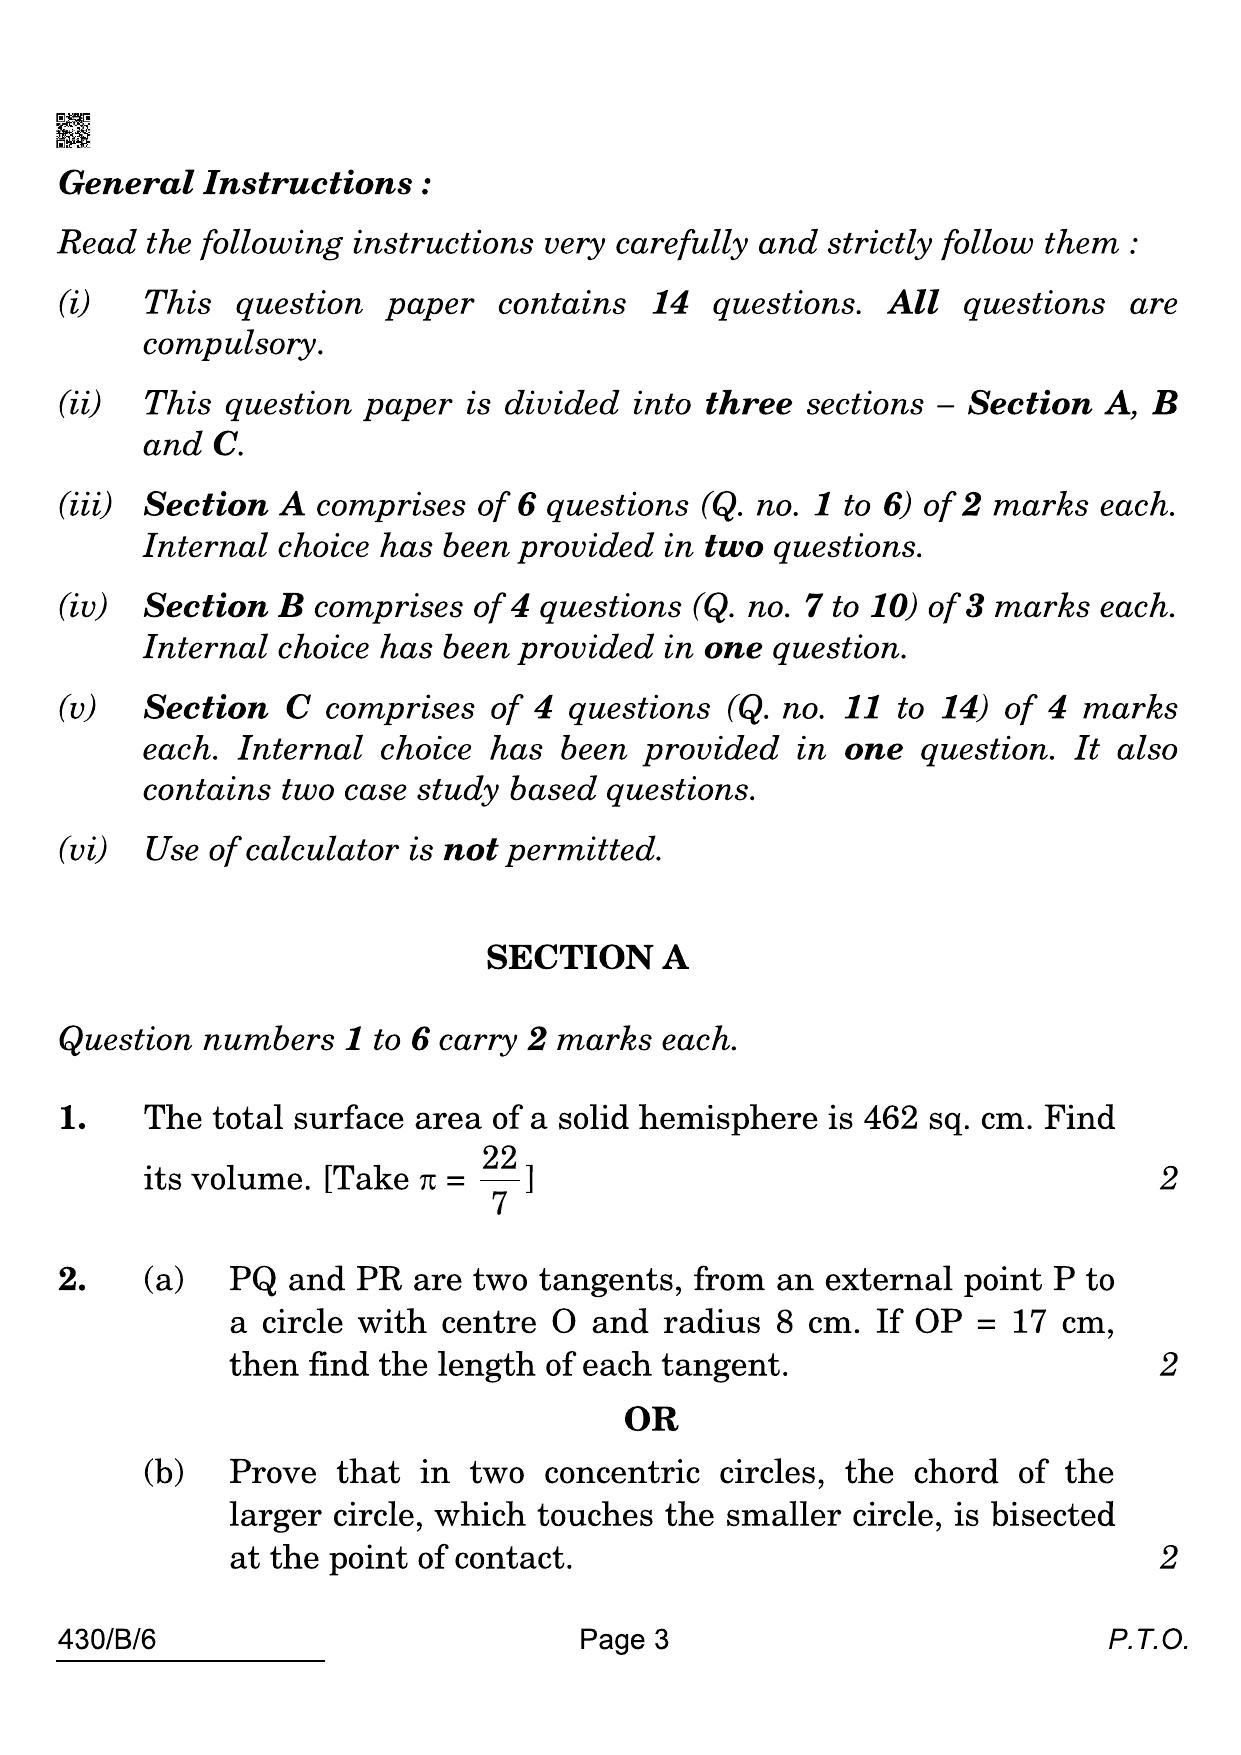 CBSE Class 10 430-B-6 Maths Basic Blind 2022 Compartment Question Paper - Page 3